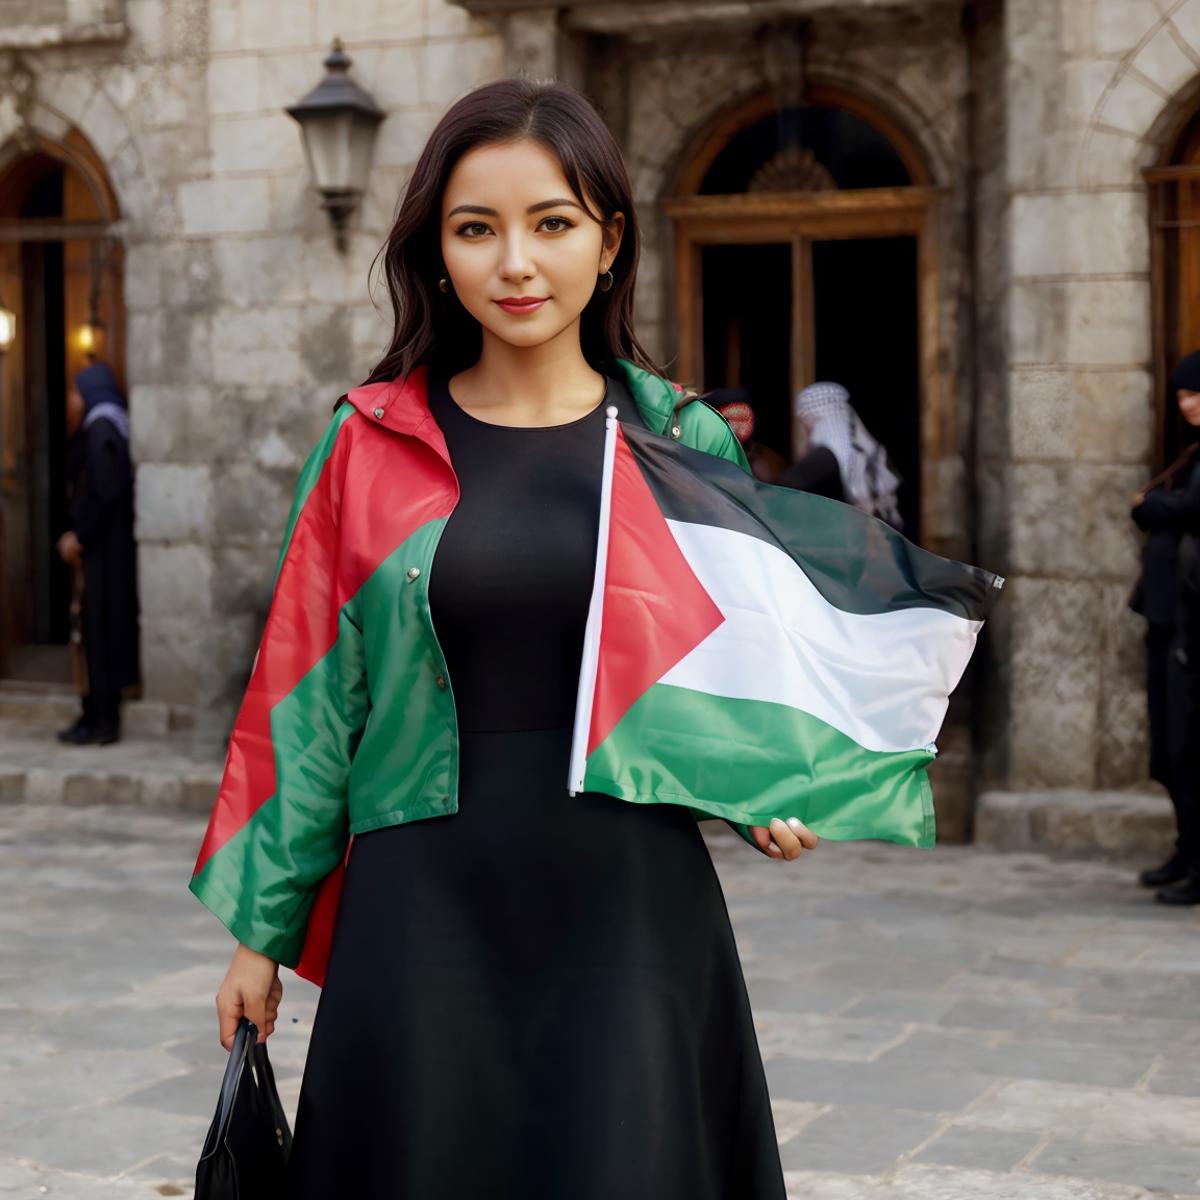 A woman in a black dress is holding a flag with a green, white, and red design.